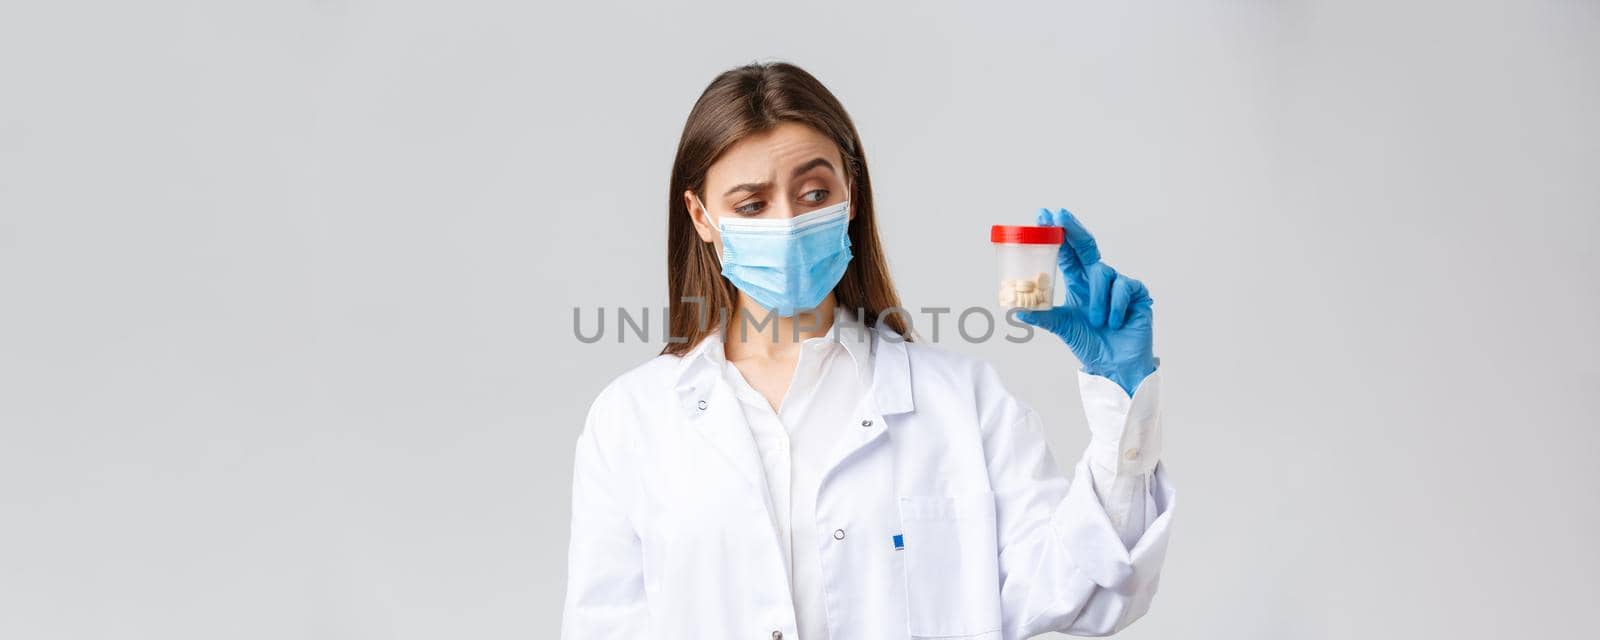 Covid-19, preventing virus, healthcare workers and quarantine concept. Unsure, curious doctor in scrubs and medical mask look intrigued and uncertain at container with medicine pills.